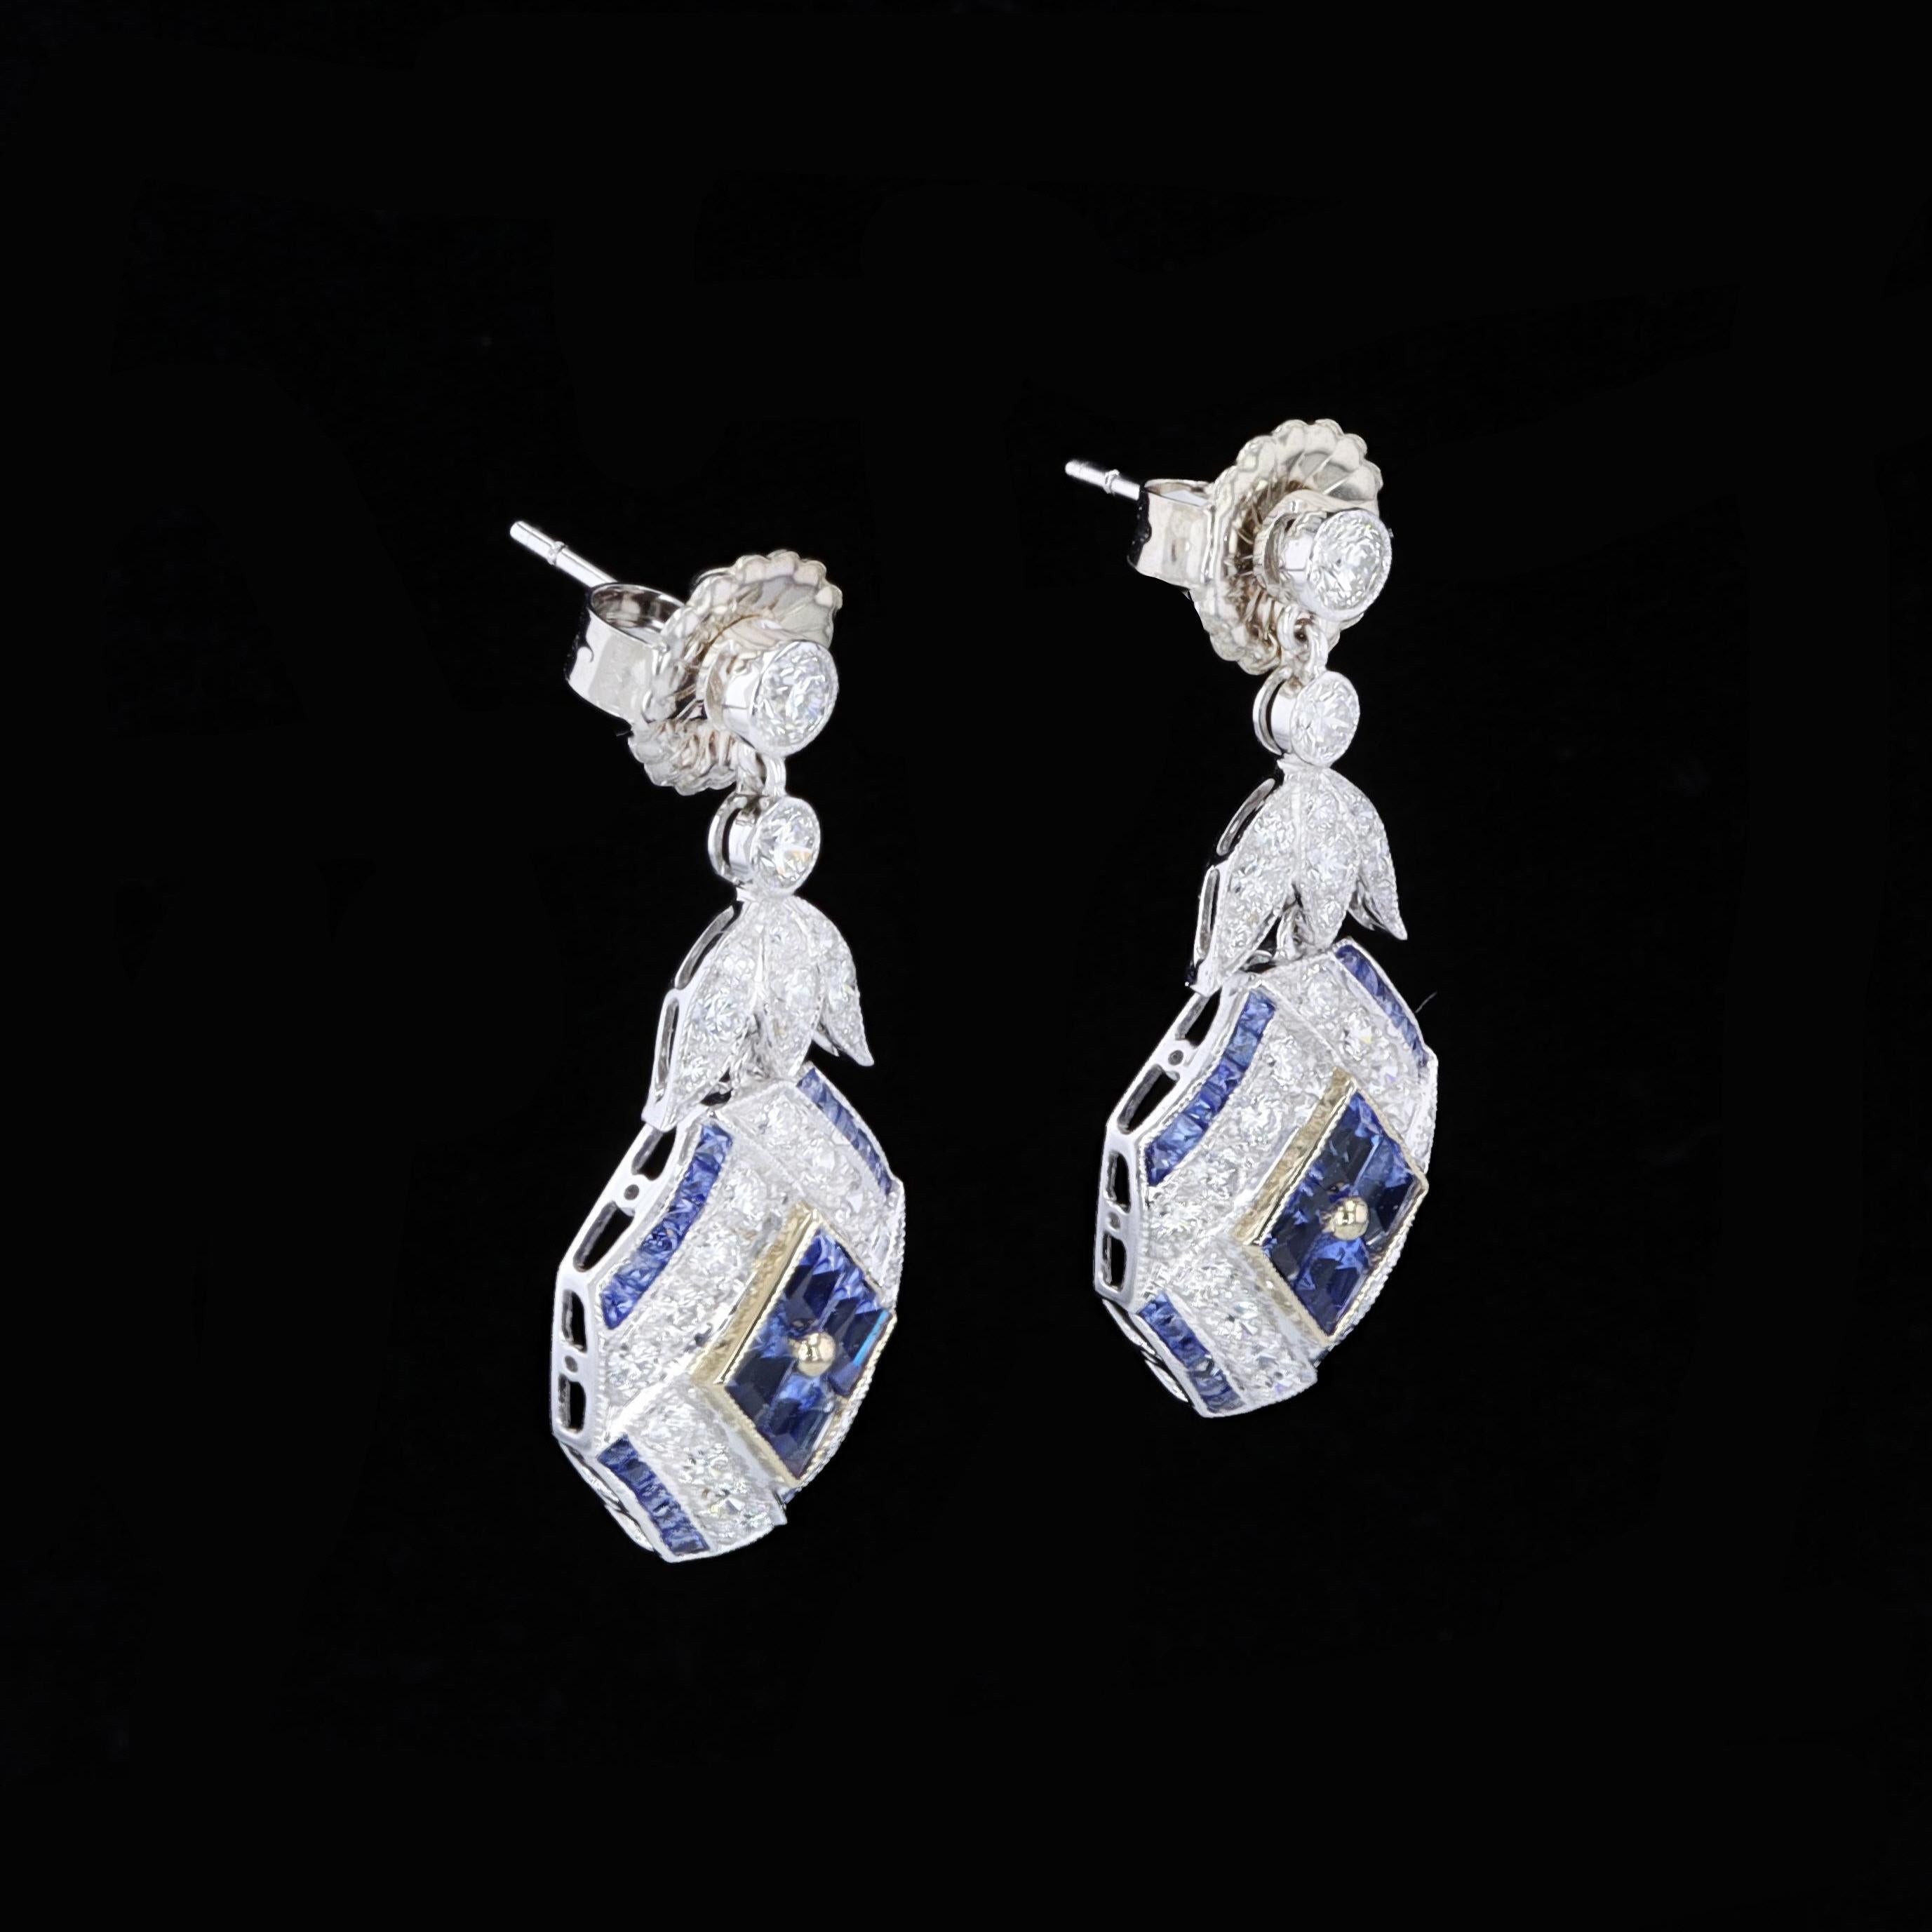 18K White and Yellow Gold Diamond Earrings with French Cut Sapphires In Excellent Condition For Sale In NEW ORLEANS, LA